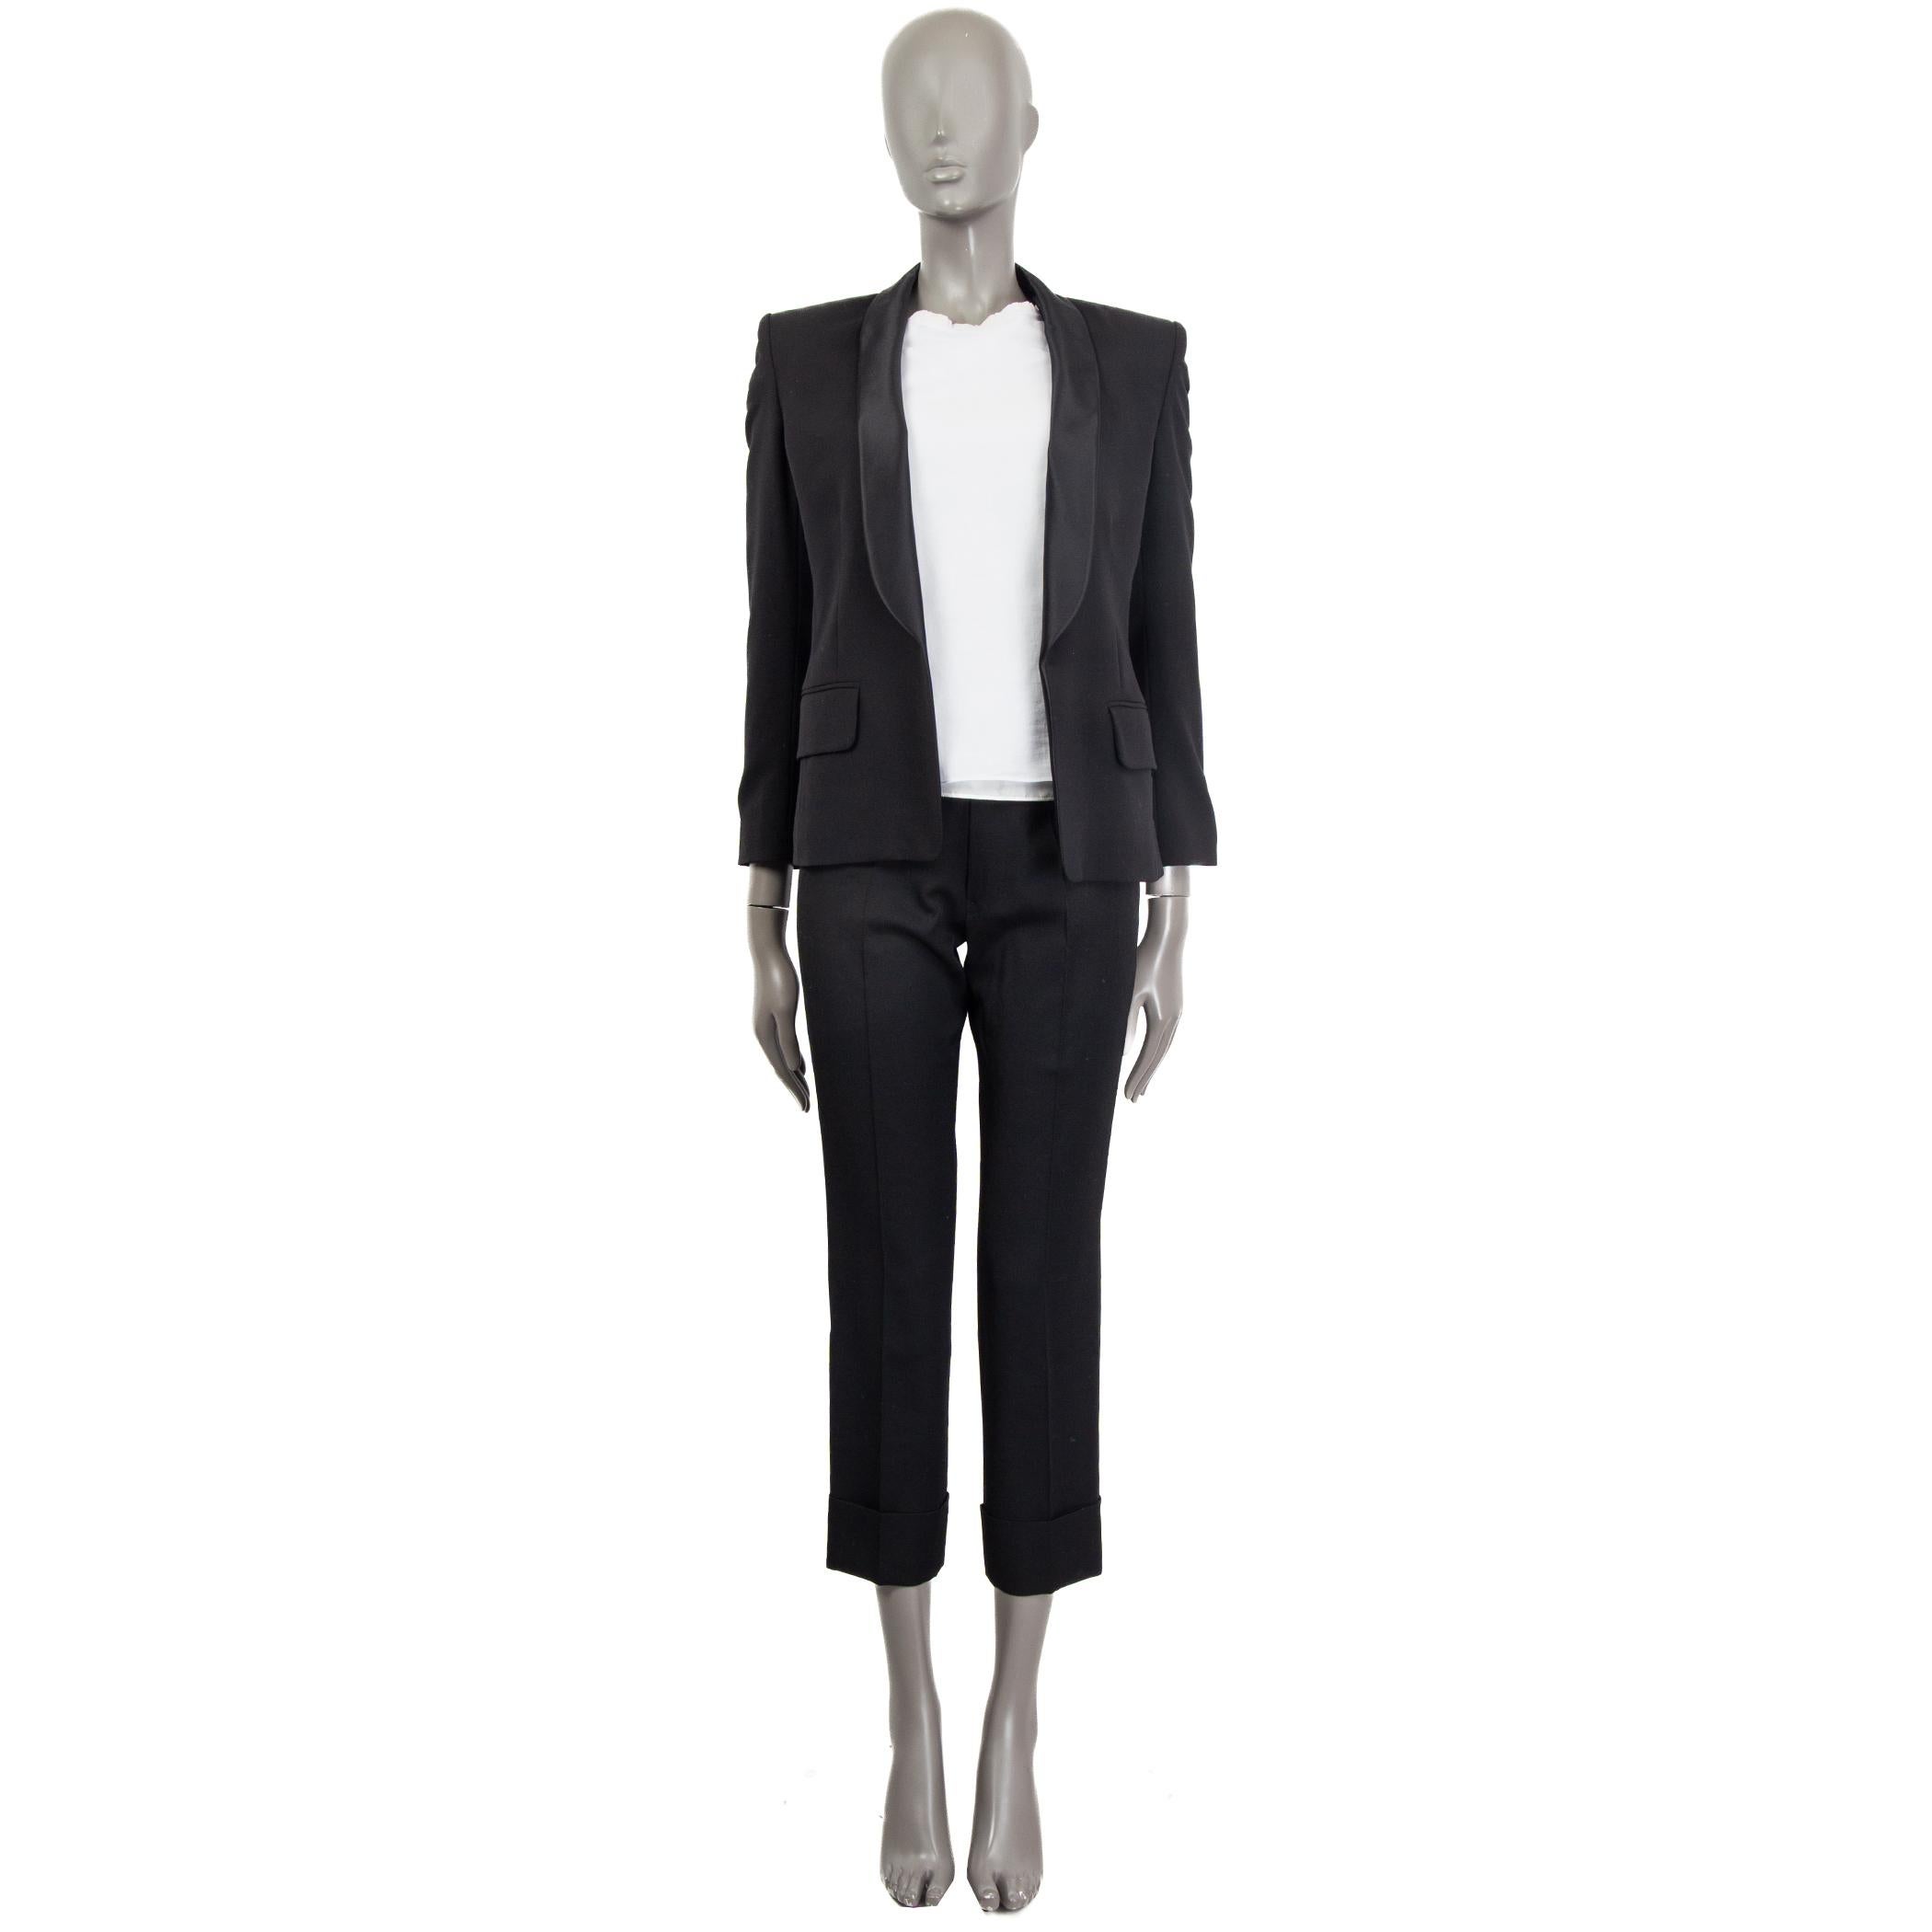 100% authentic Balmain open blazer in black wool (100%). Features a satin lapel and two flap pockets (one sewn shut) on the front. Lined in black viscose (52%) and cotton (48%). Has been worn and is in excellent condition.

Measurements
Tag